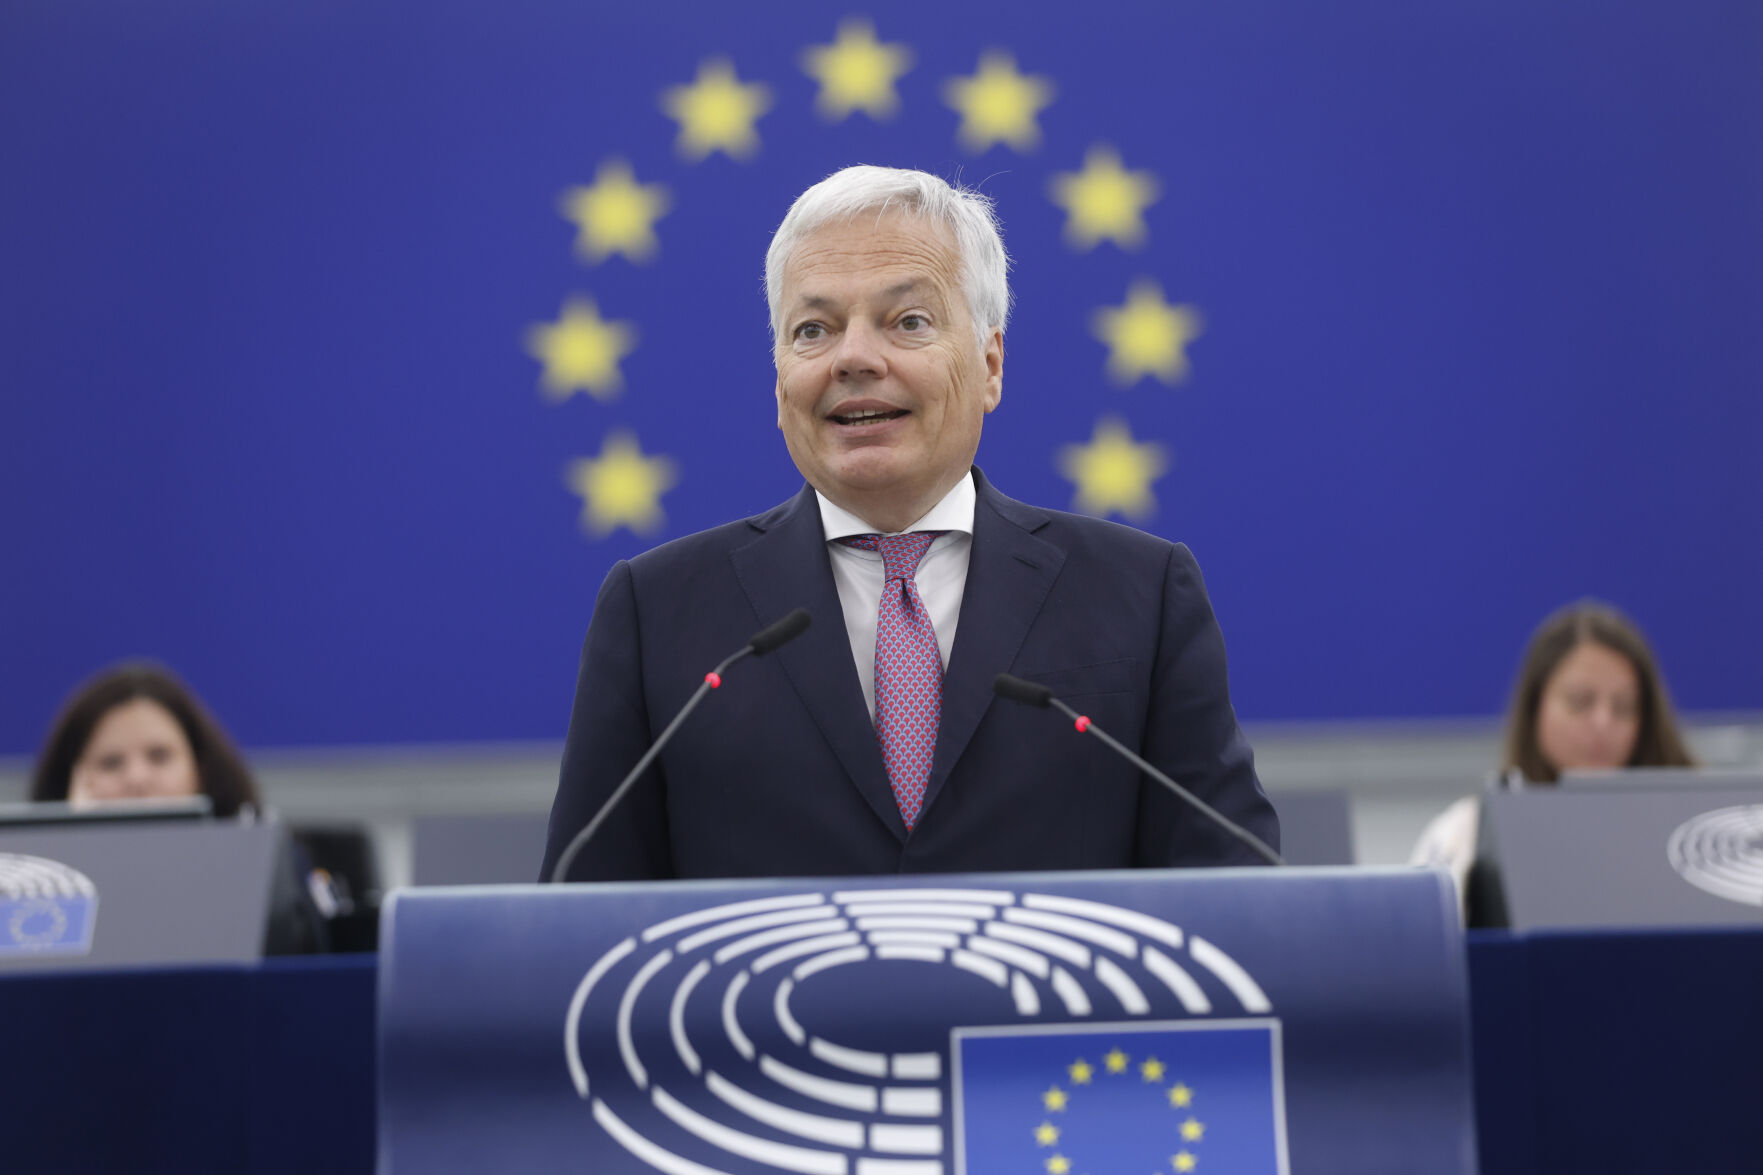 <p>FILE - European Commissioner for Justice Didier Reynders delivers a speech on the electoral law, the investigative committee and the rule of law in Poland, Wednesday, June 14, 2023 at the European Parliament in Strasbourg, eastern France. The European Union on Thursday, Oct. 12, 2023 ordered U.S. biotech giant Illumina to undo its $7.1 billion purchase of cancer-screening company Grail because it closed the deal without approval of regulators in the 27-nation bloc. (AP Photo/Jean-Francois Badias, File)</p>   PHOTO CREDIT: Jean-Francois Badias